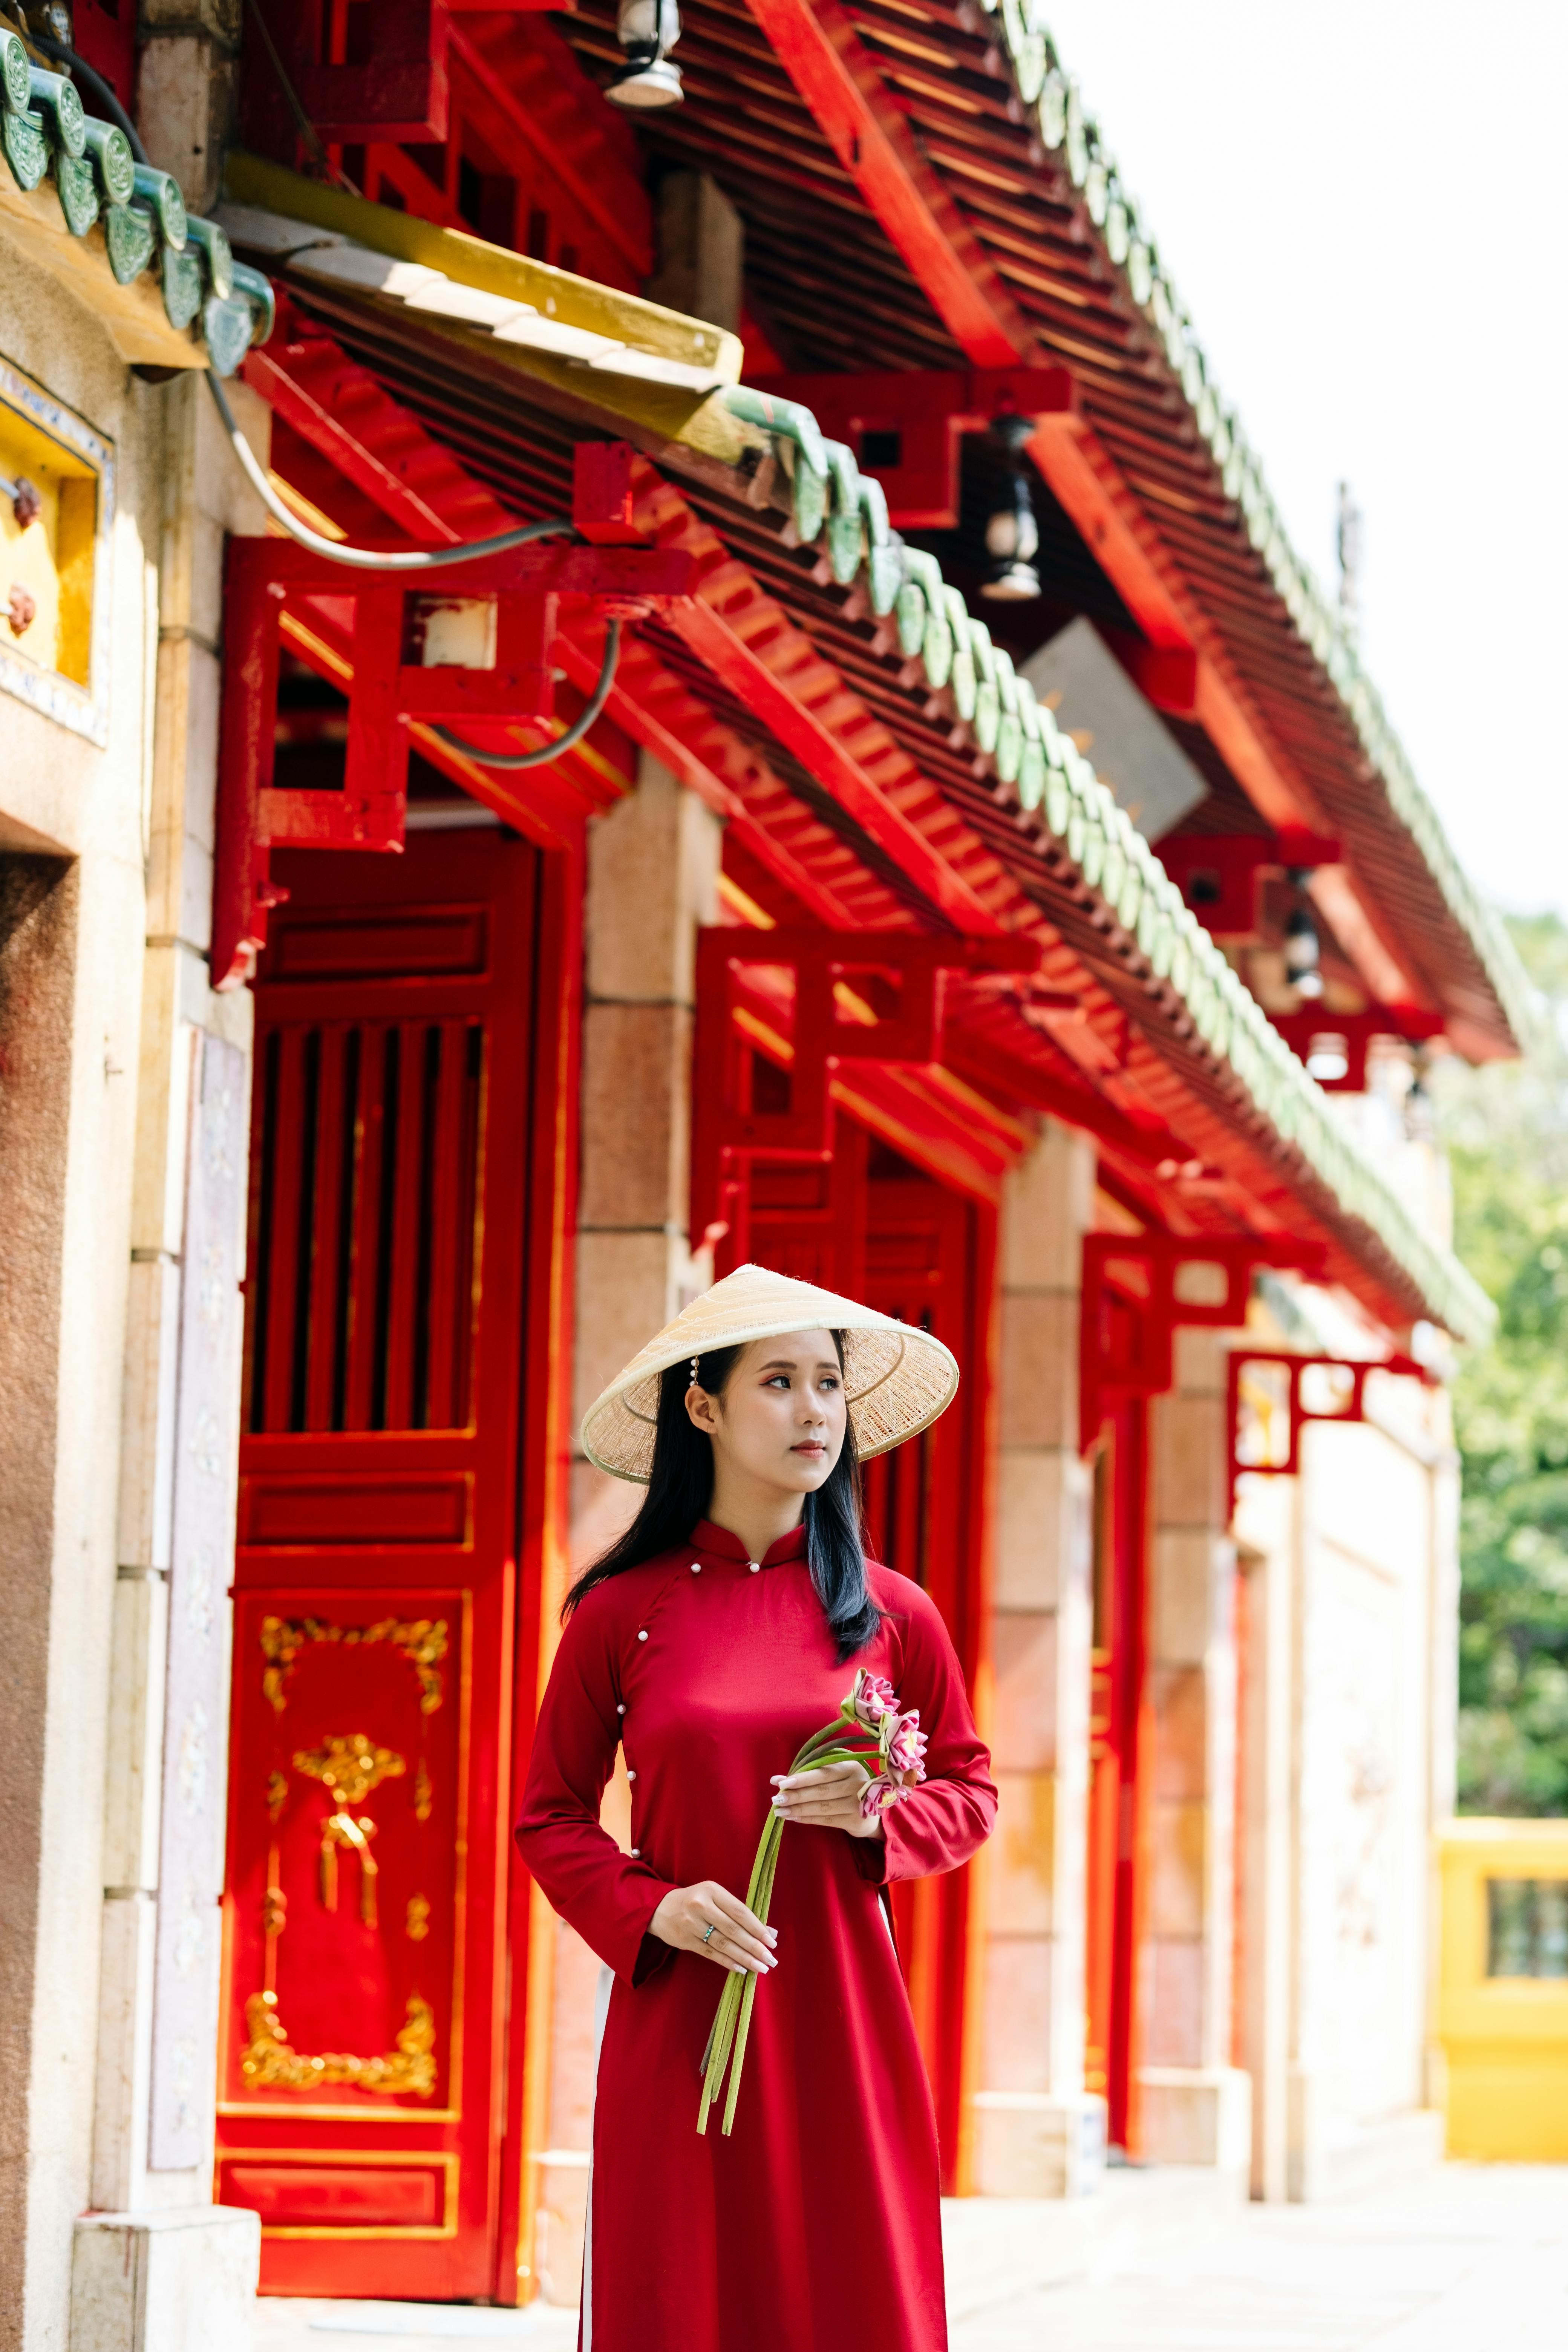 Woman in Red Dress in Pagoda · Free Stock Photo